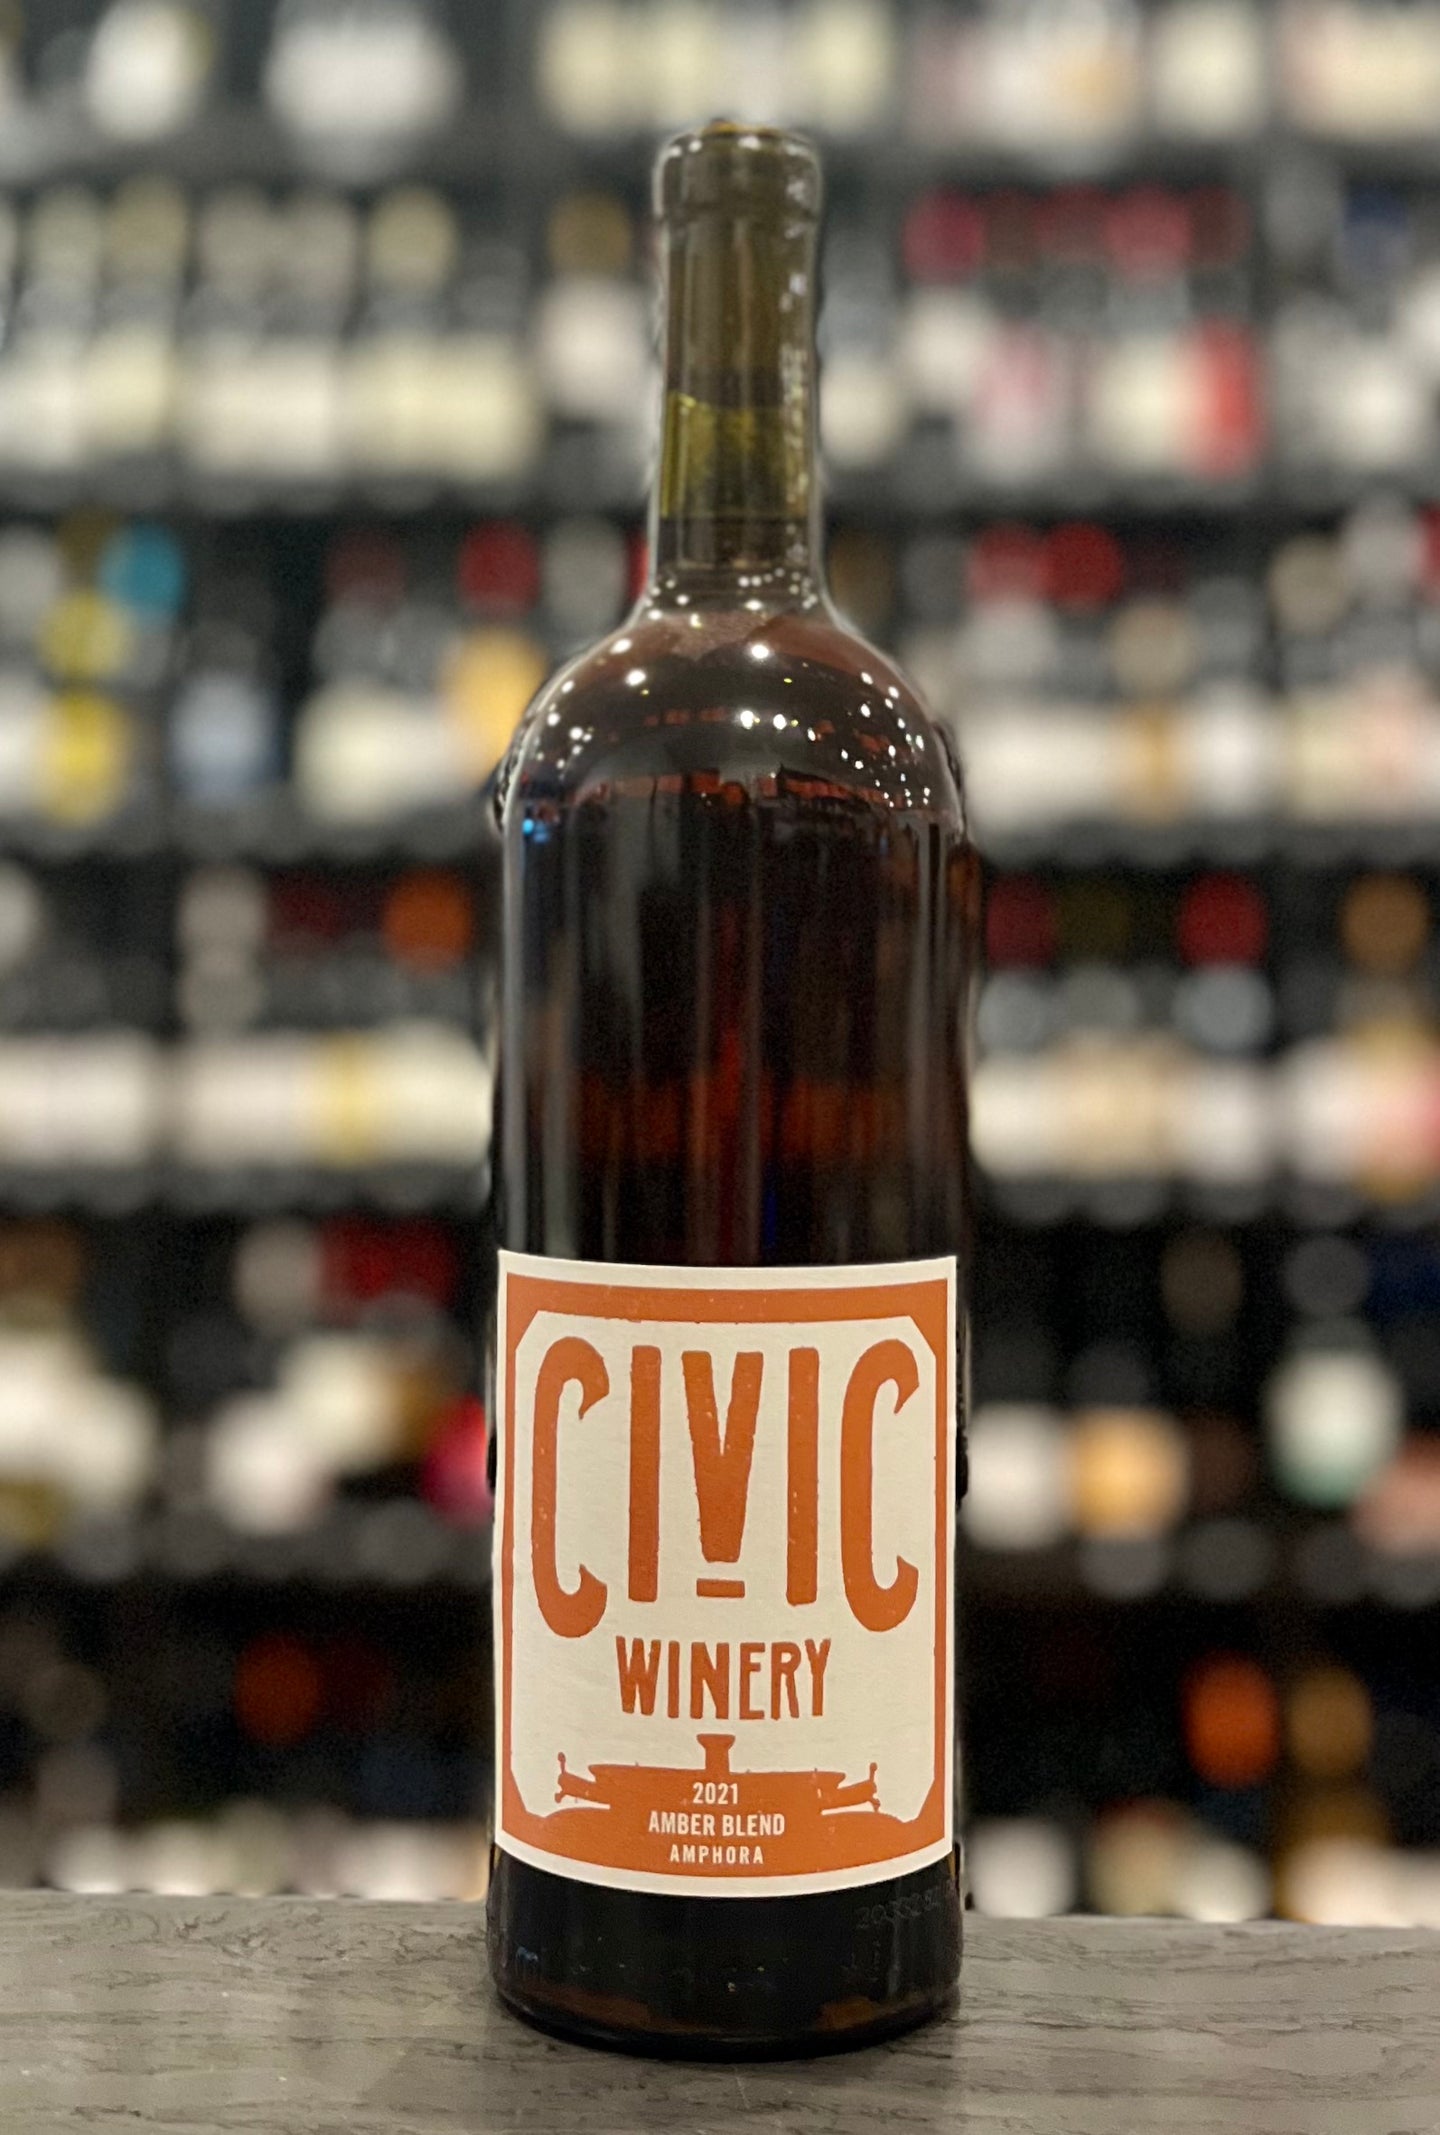 Civic Winery Amber Blend